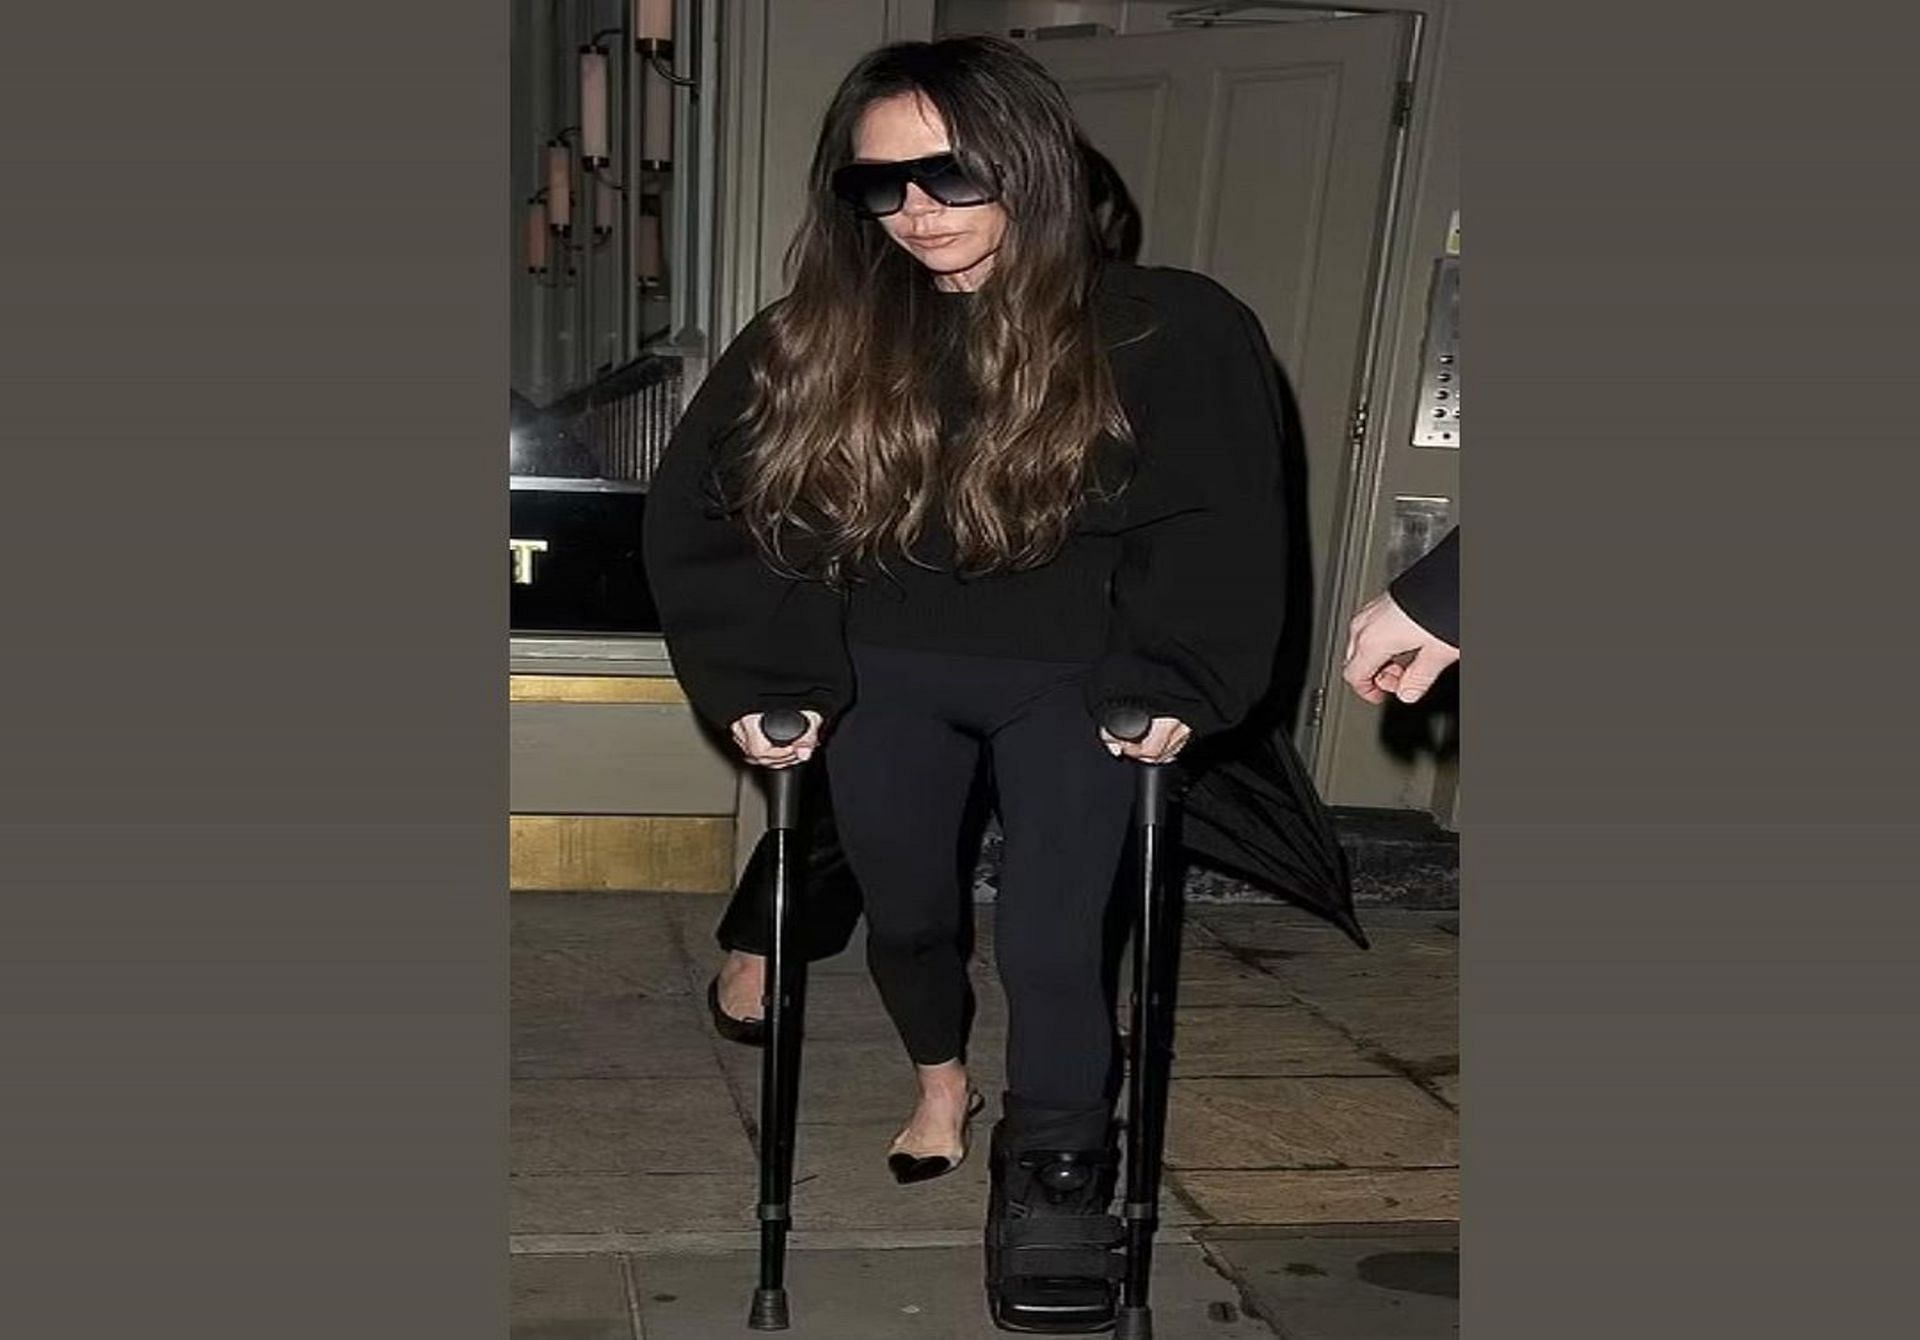 Victoria Beckham seen using crutches (Image by keepupwiththebeckhams/Instagram)